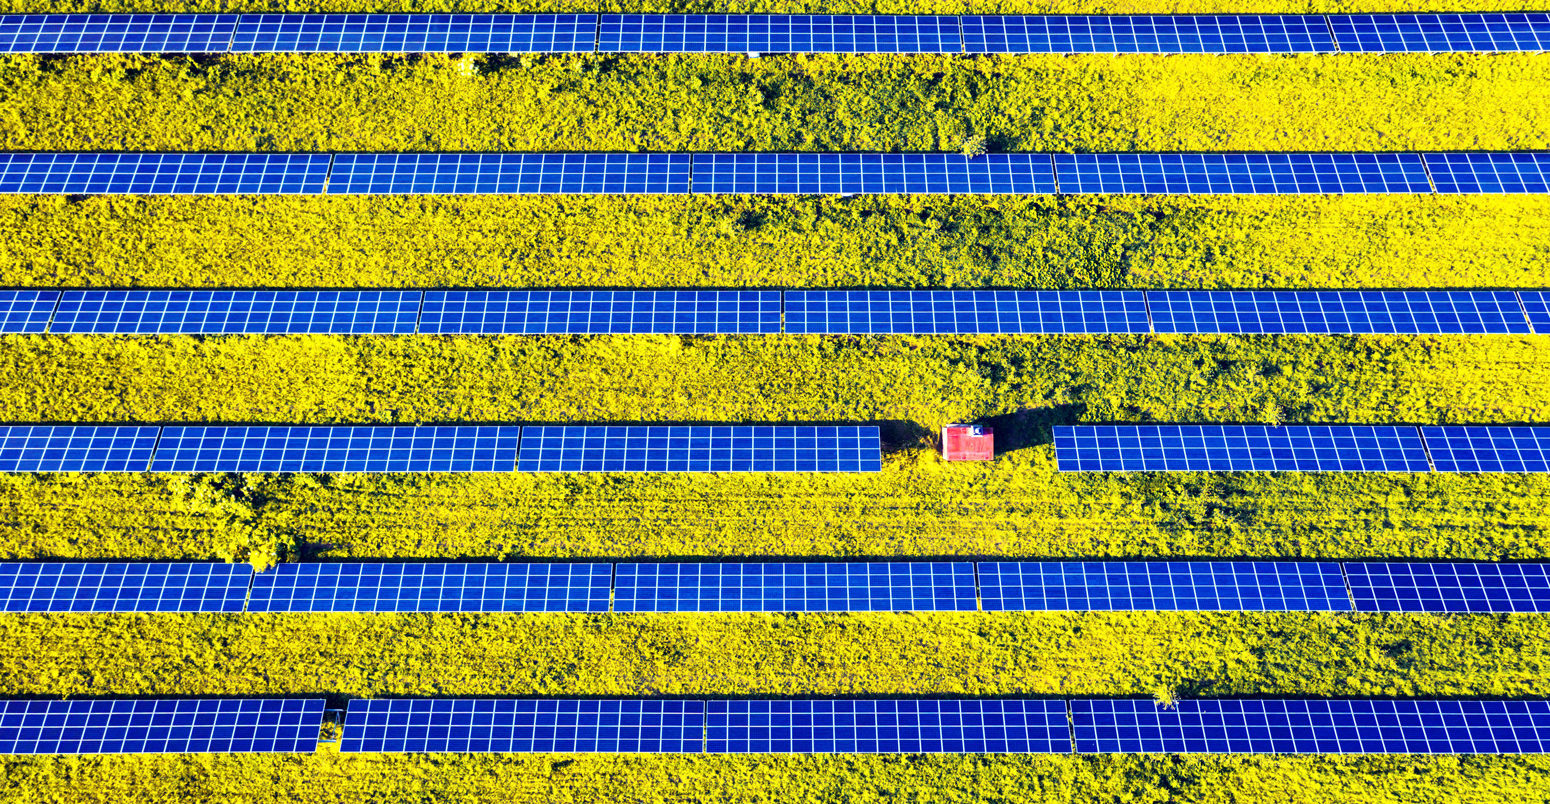 Aerial drone photo looking down on rows of blue solar panels in a renewable energy farm, Ukraine. Credit: Ivan Kmit / Alamy Stock Photo